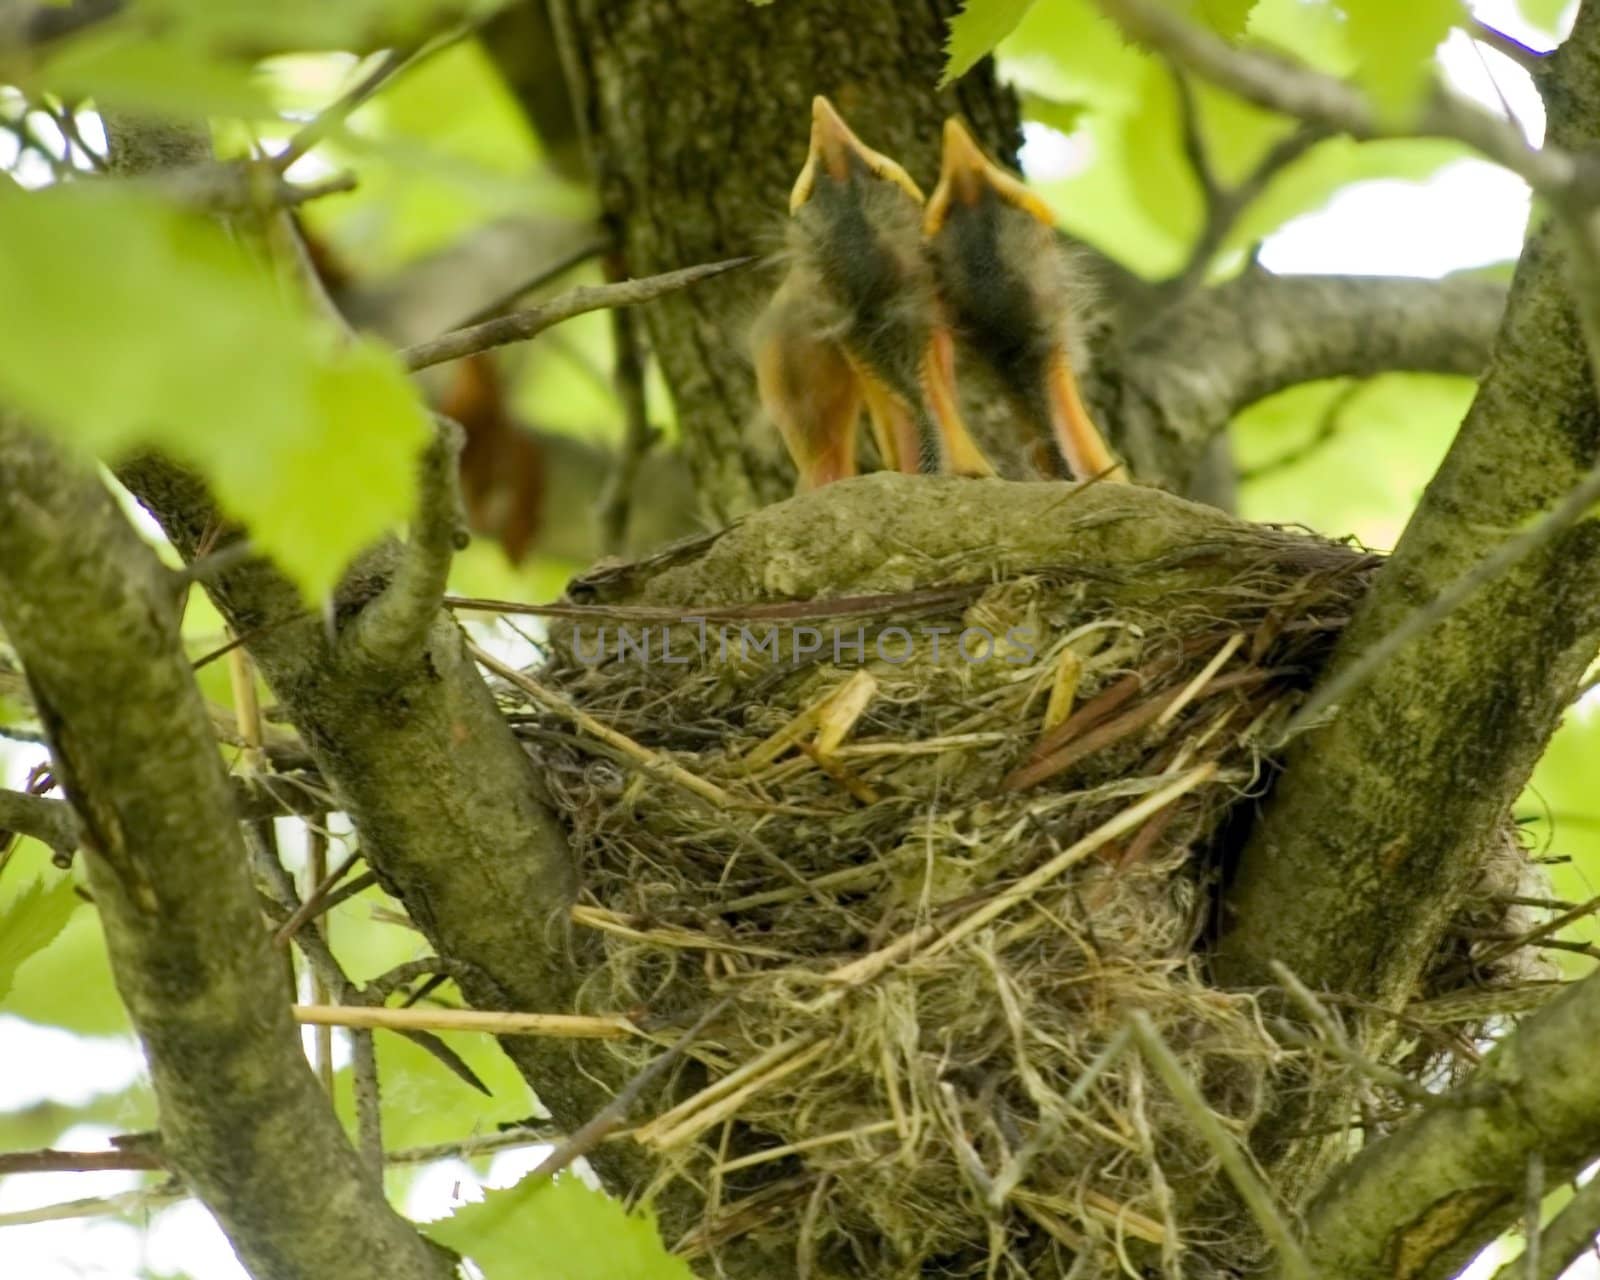 A robin nest with young chicks looking for food from their parents.